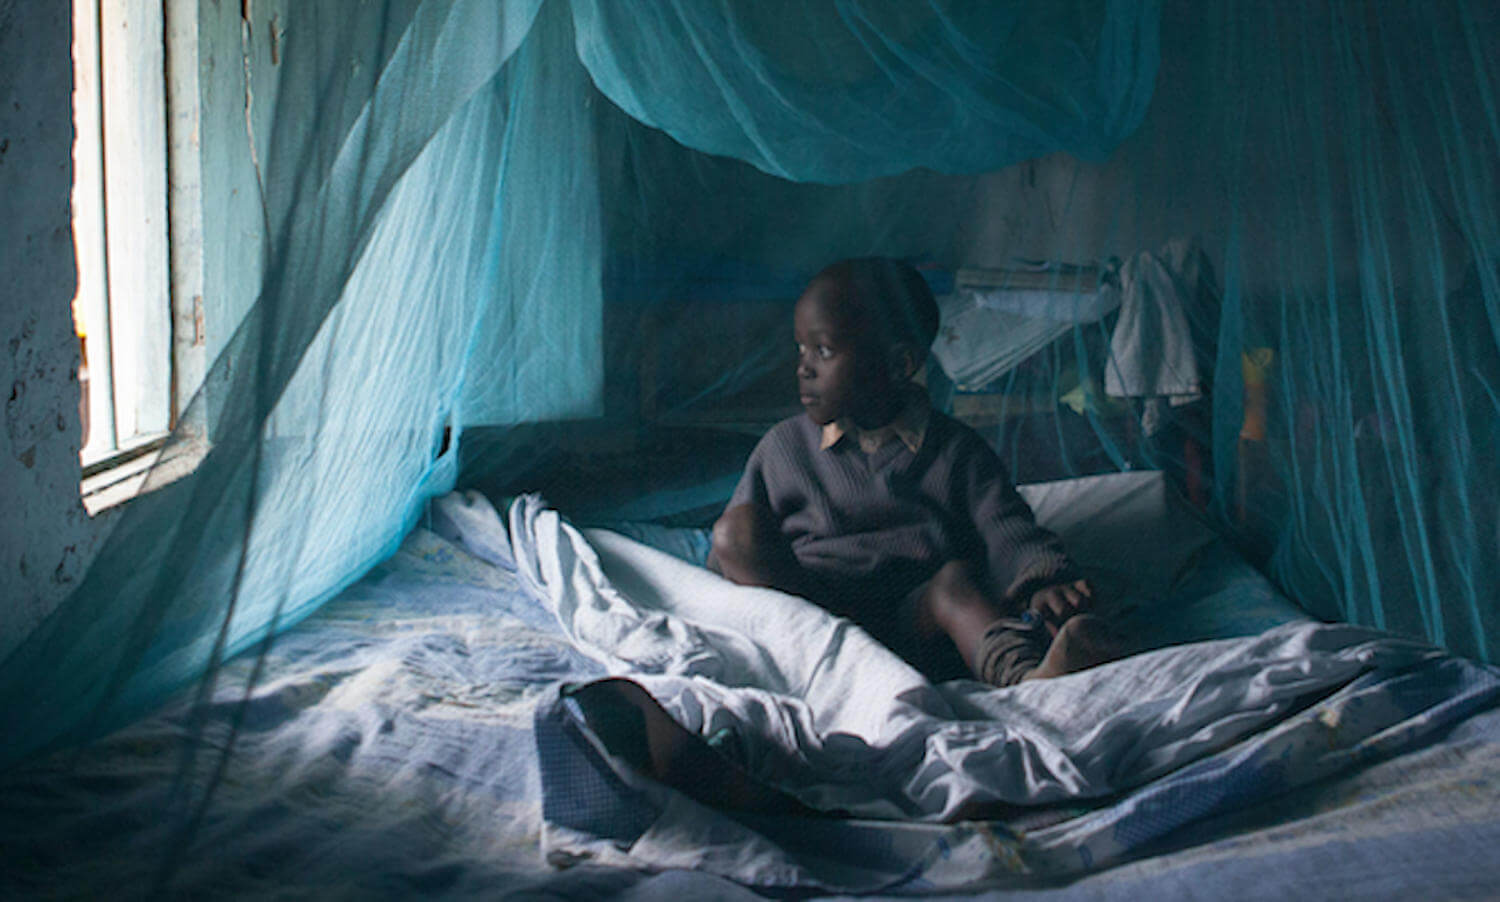 A child sits on a bed underneath a mosquito net near an open window in Kenya, Africa